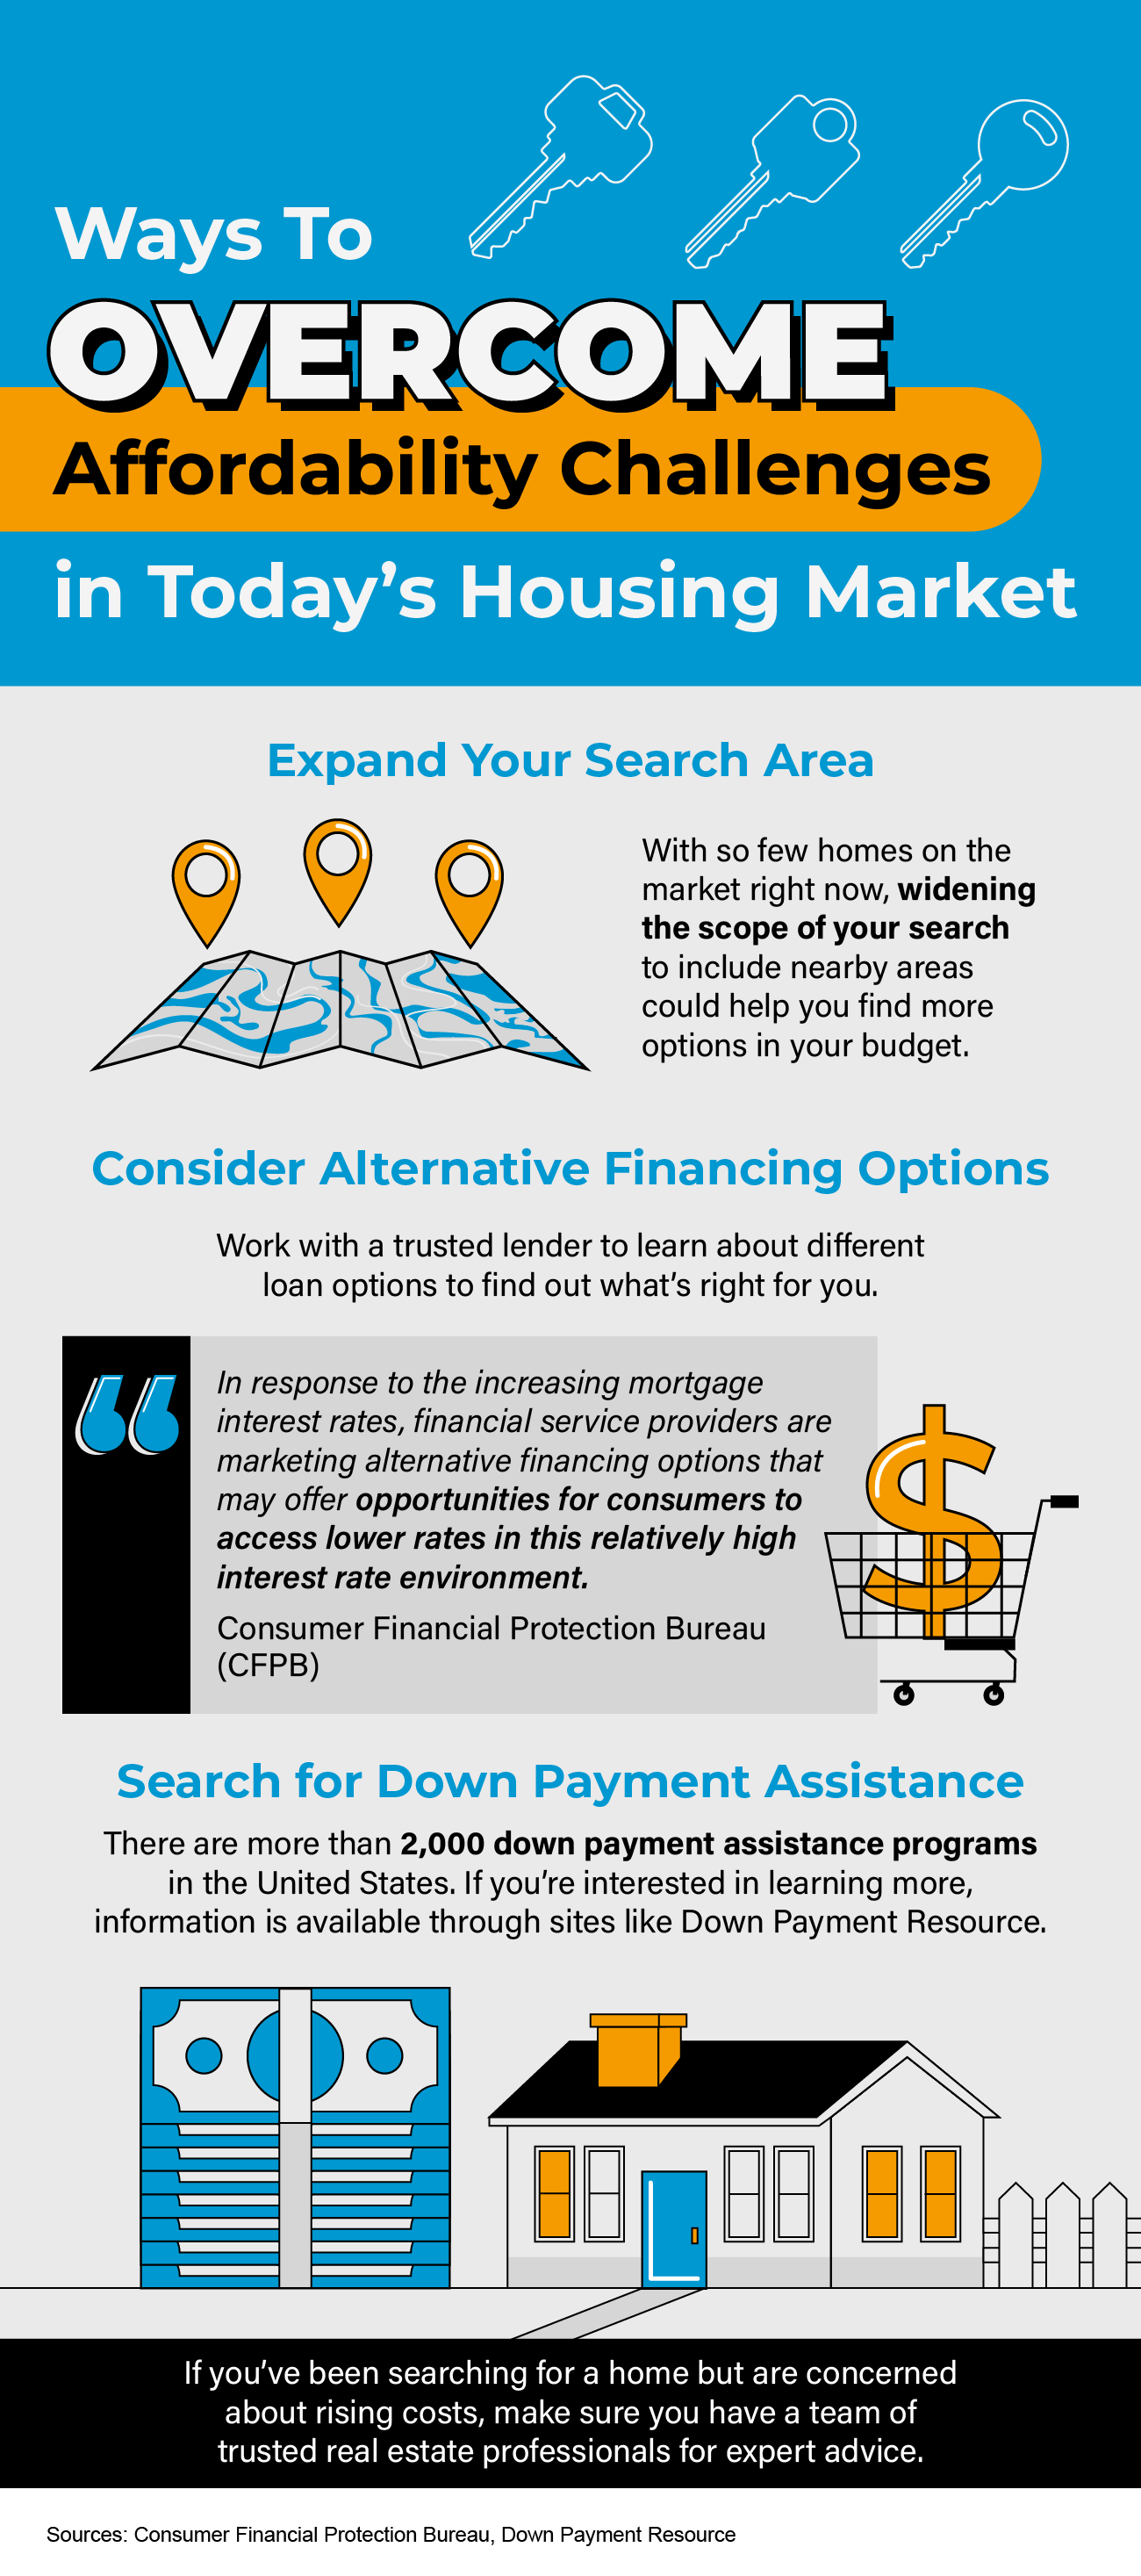  Ways-To-Overcome-Affordability-Challenges-In-Today Ways To Overcome Affordability Challenges in Today’s Housing Market [INFOGRAPHIC]  